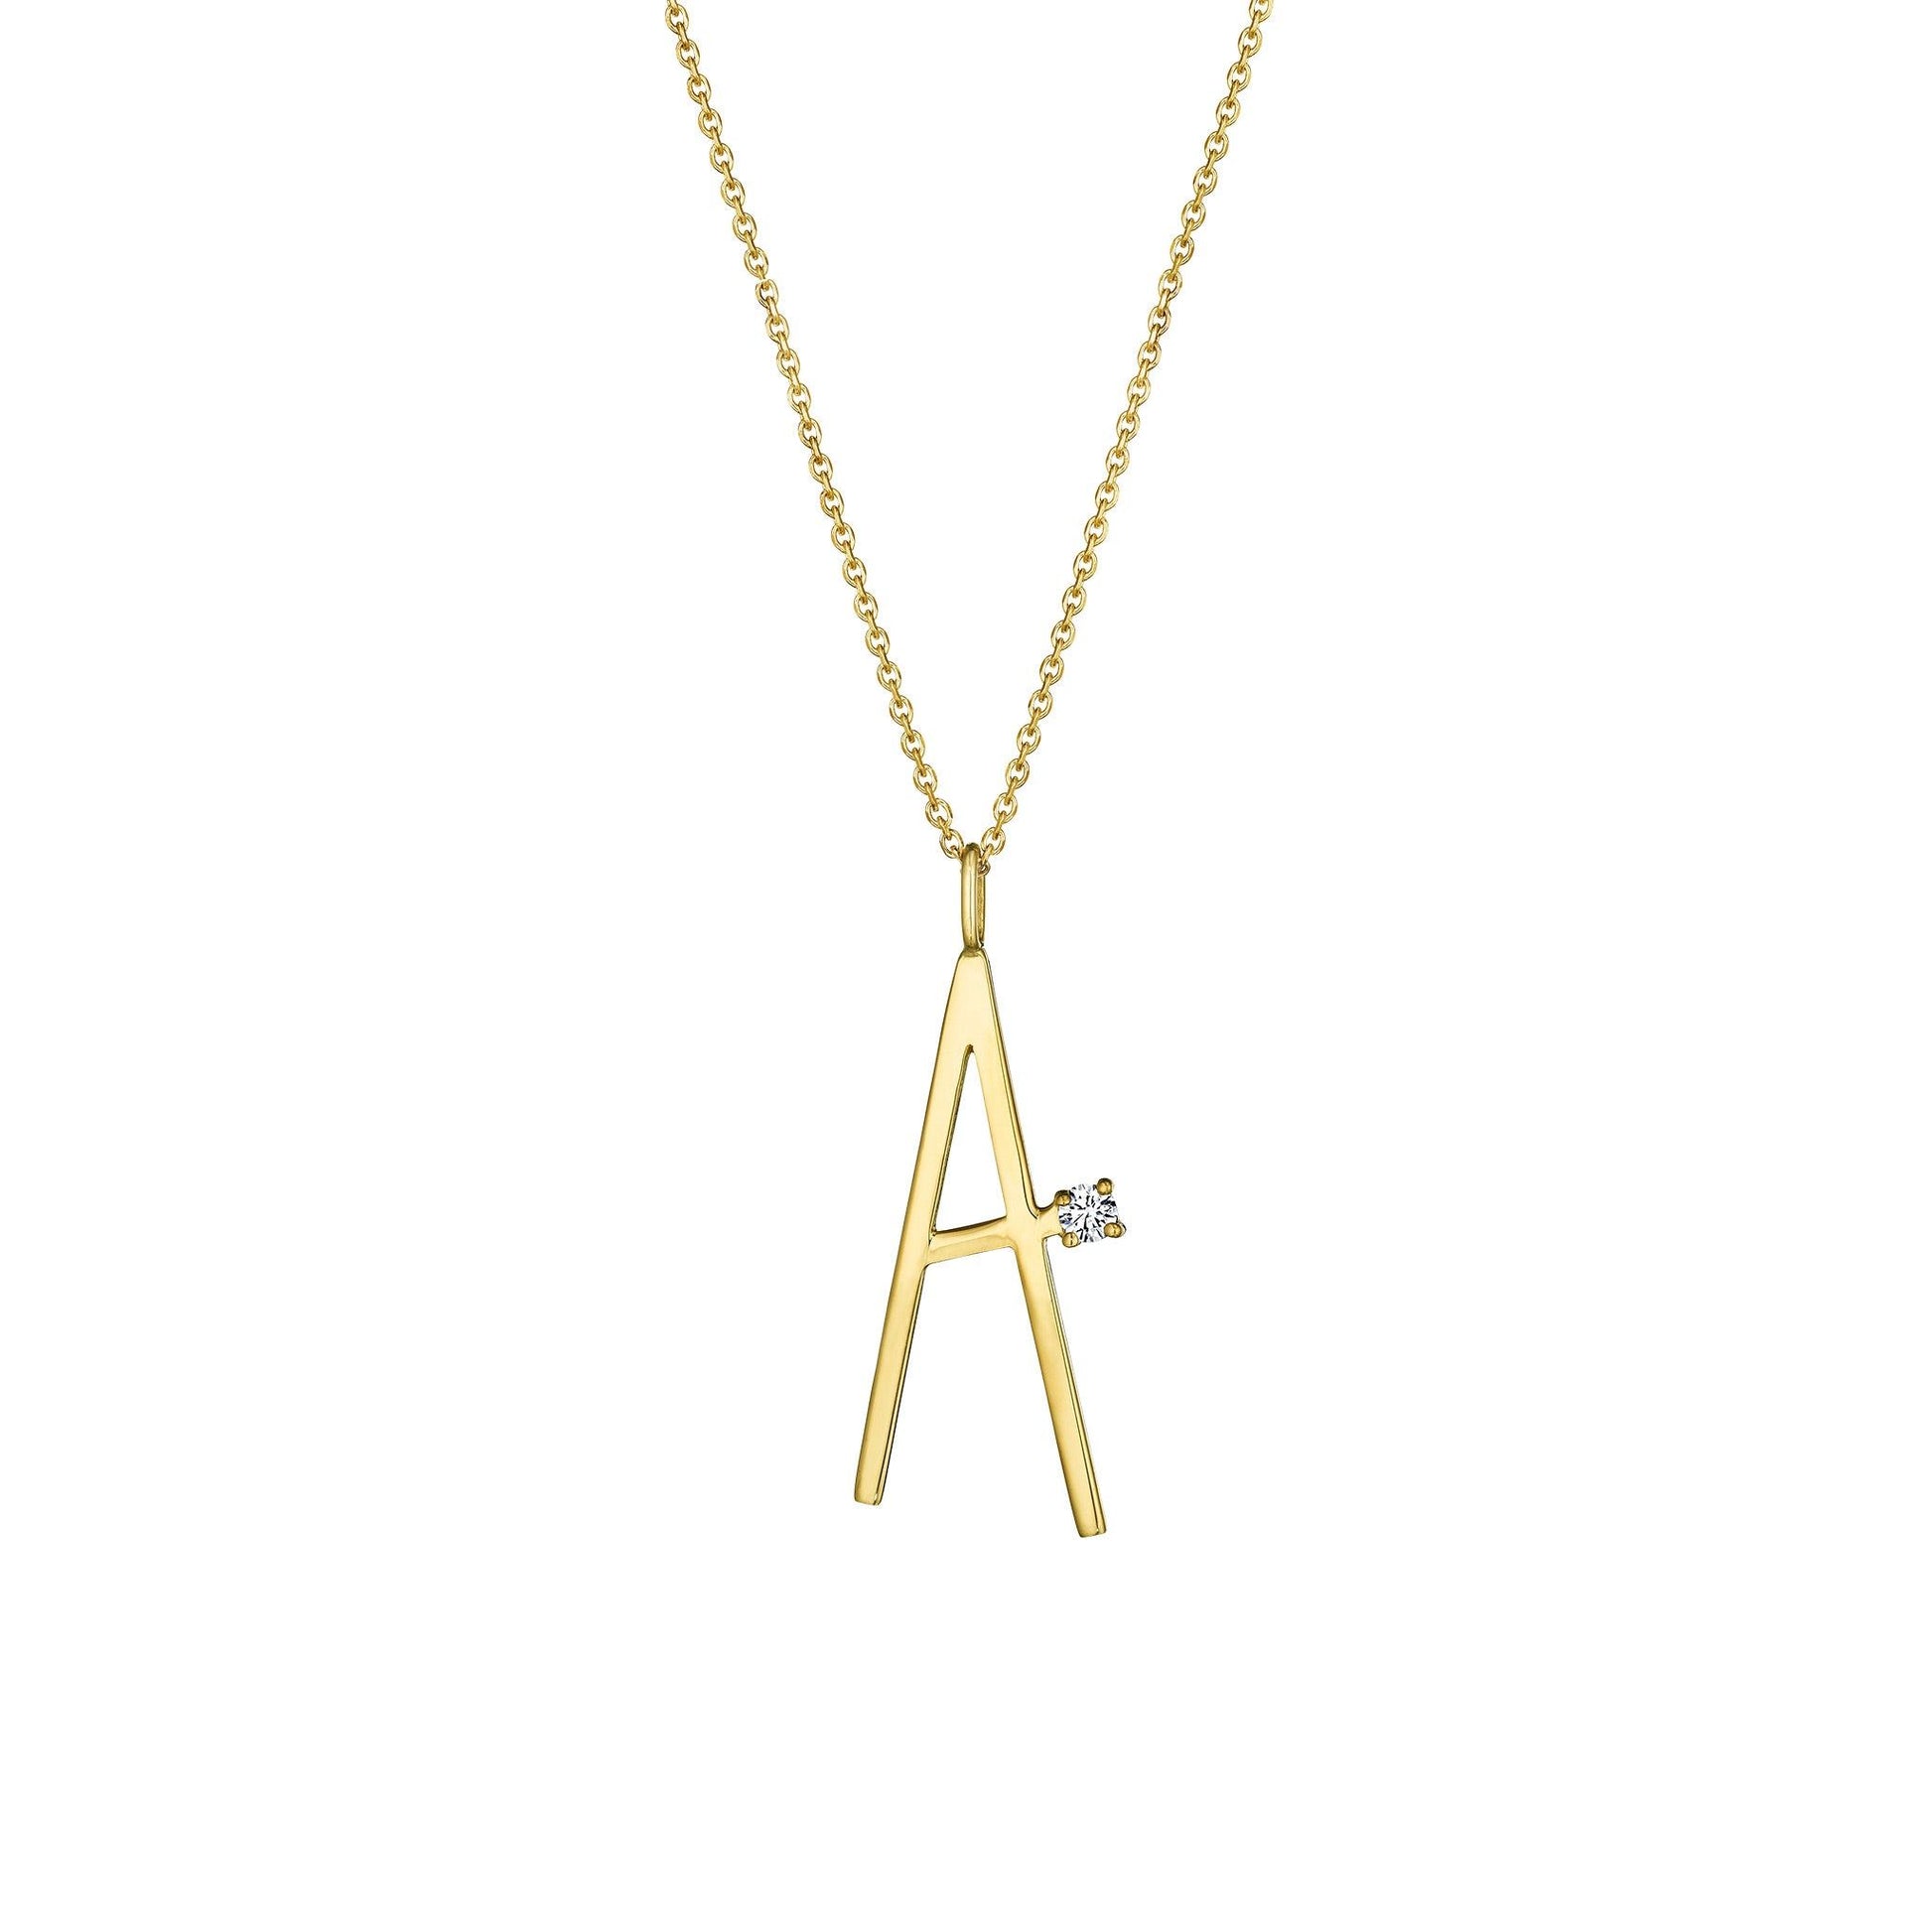 Mimi So Type Letter A Pendant Necklace_18k Yellow Gold